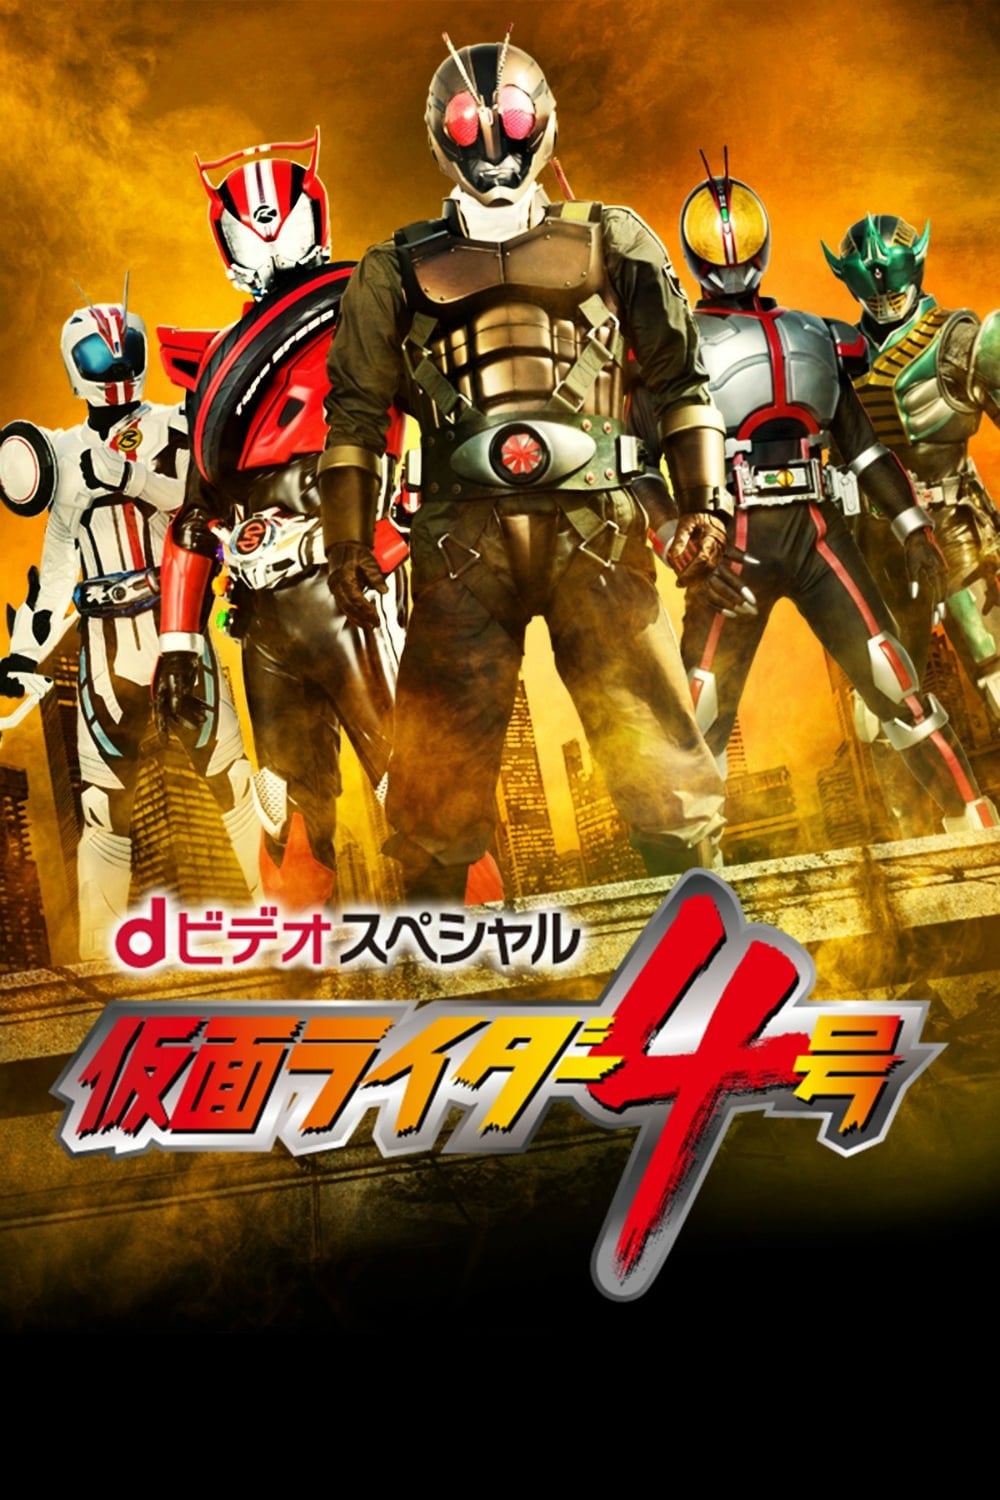 ｄビデオスペシャル　仮面ライダー4号 TV Shows About Time Loop